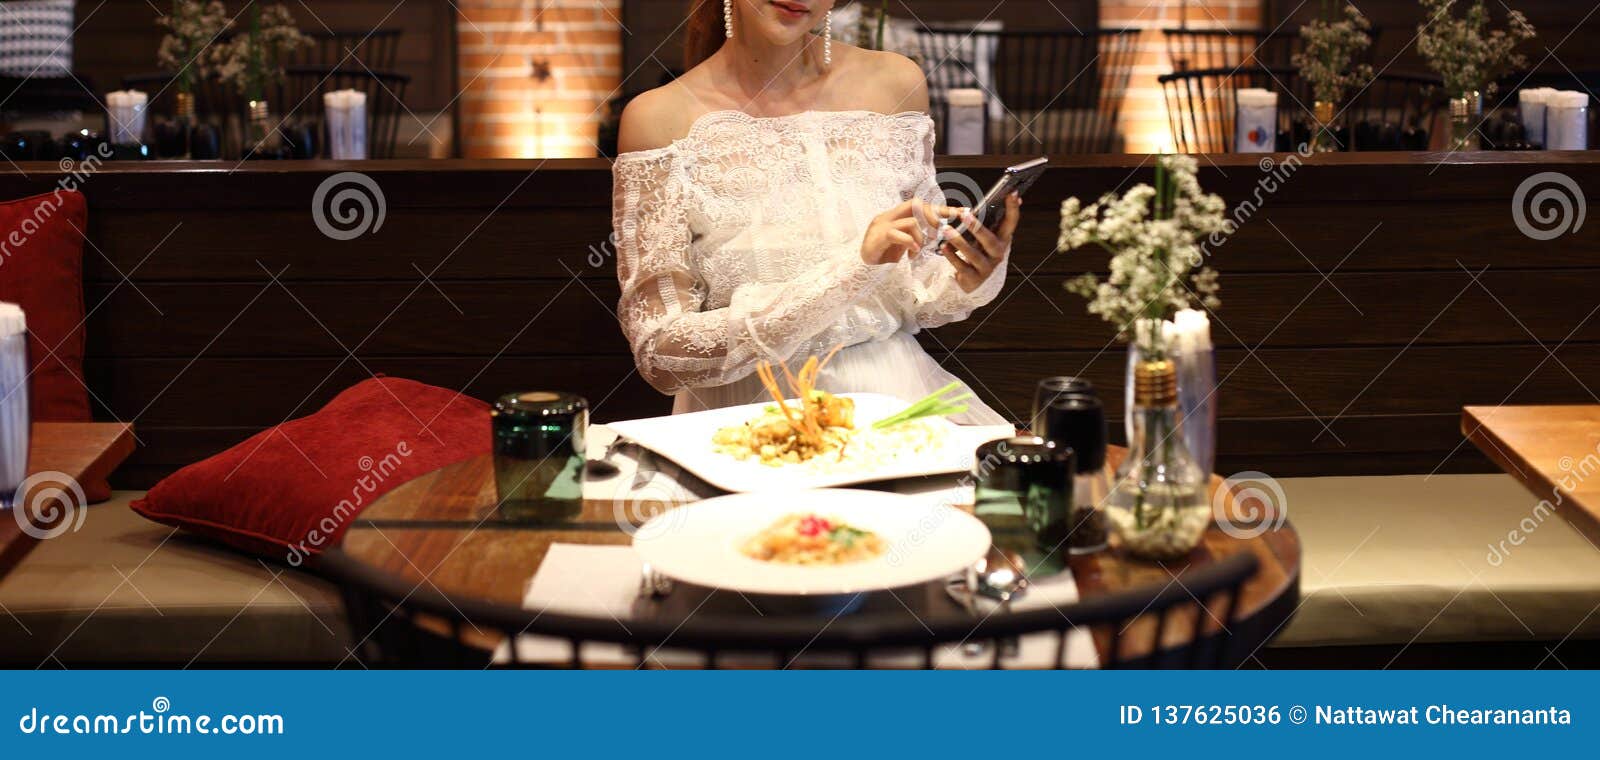 woman white lace dress have dinner in restaurant